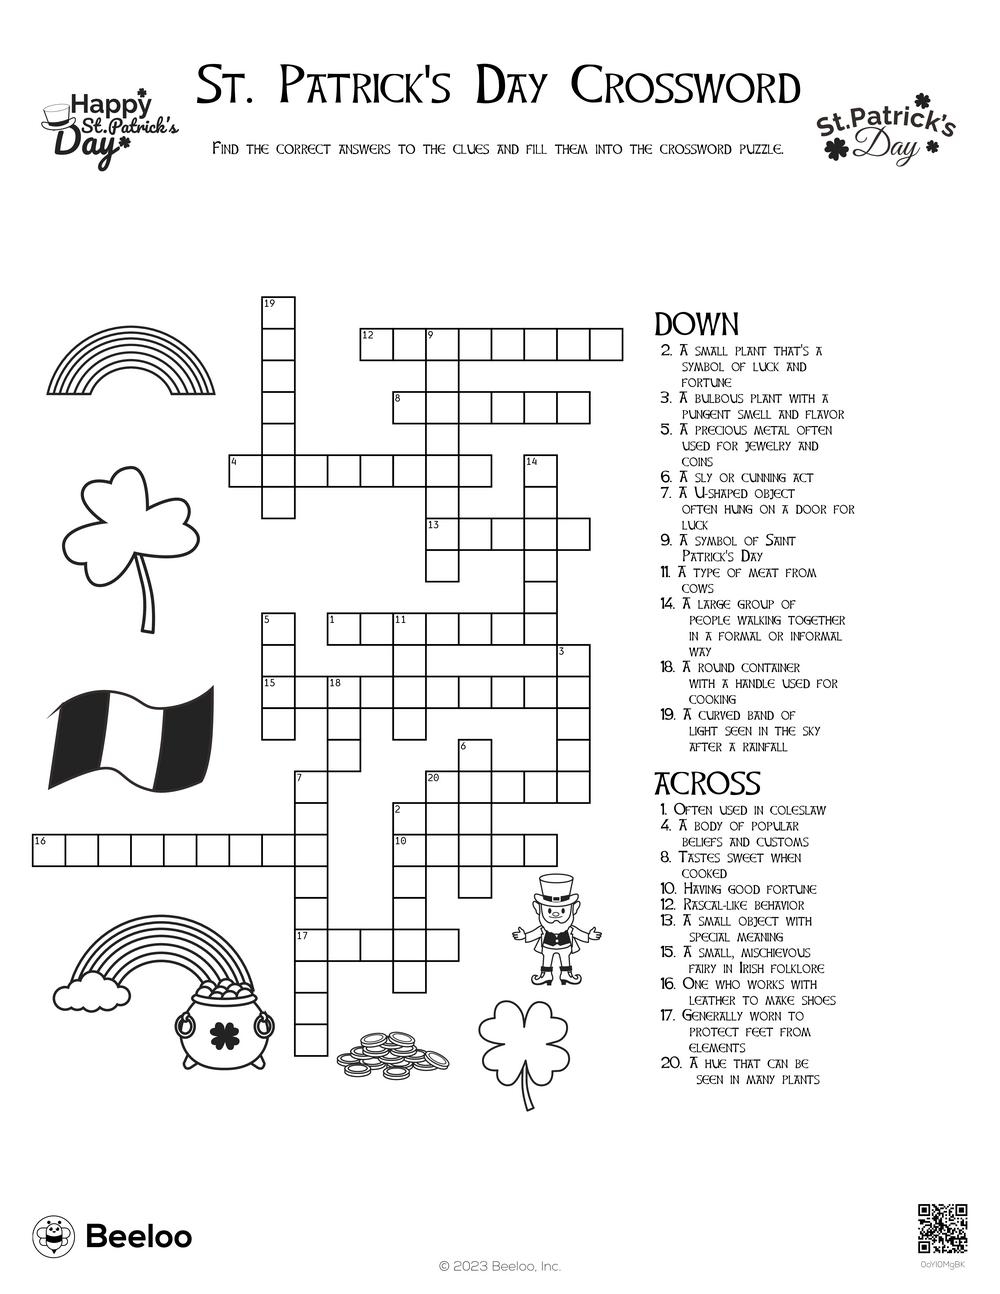 St Patrick s Day themed Crossword Puzzles Beeloo Printable Crafts And Activities For Kids